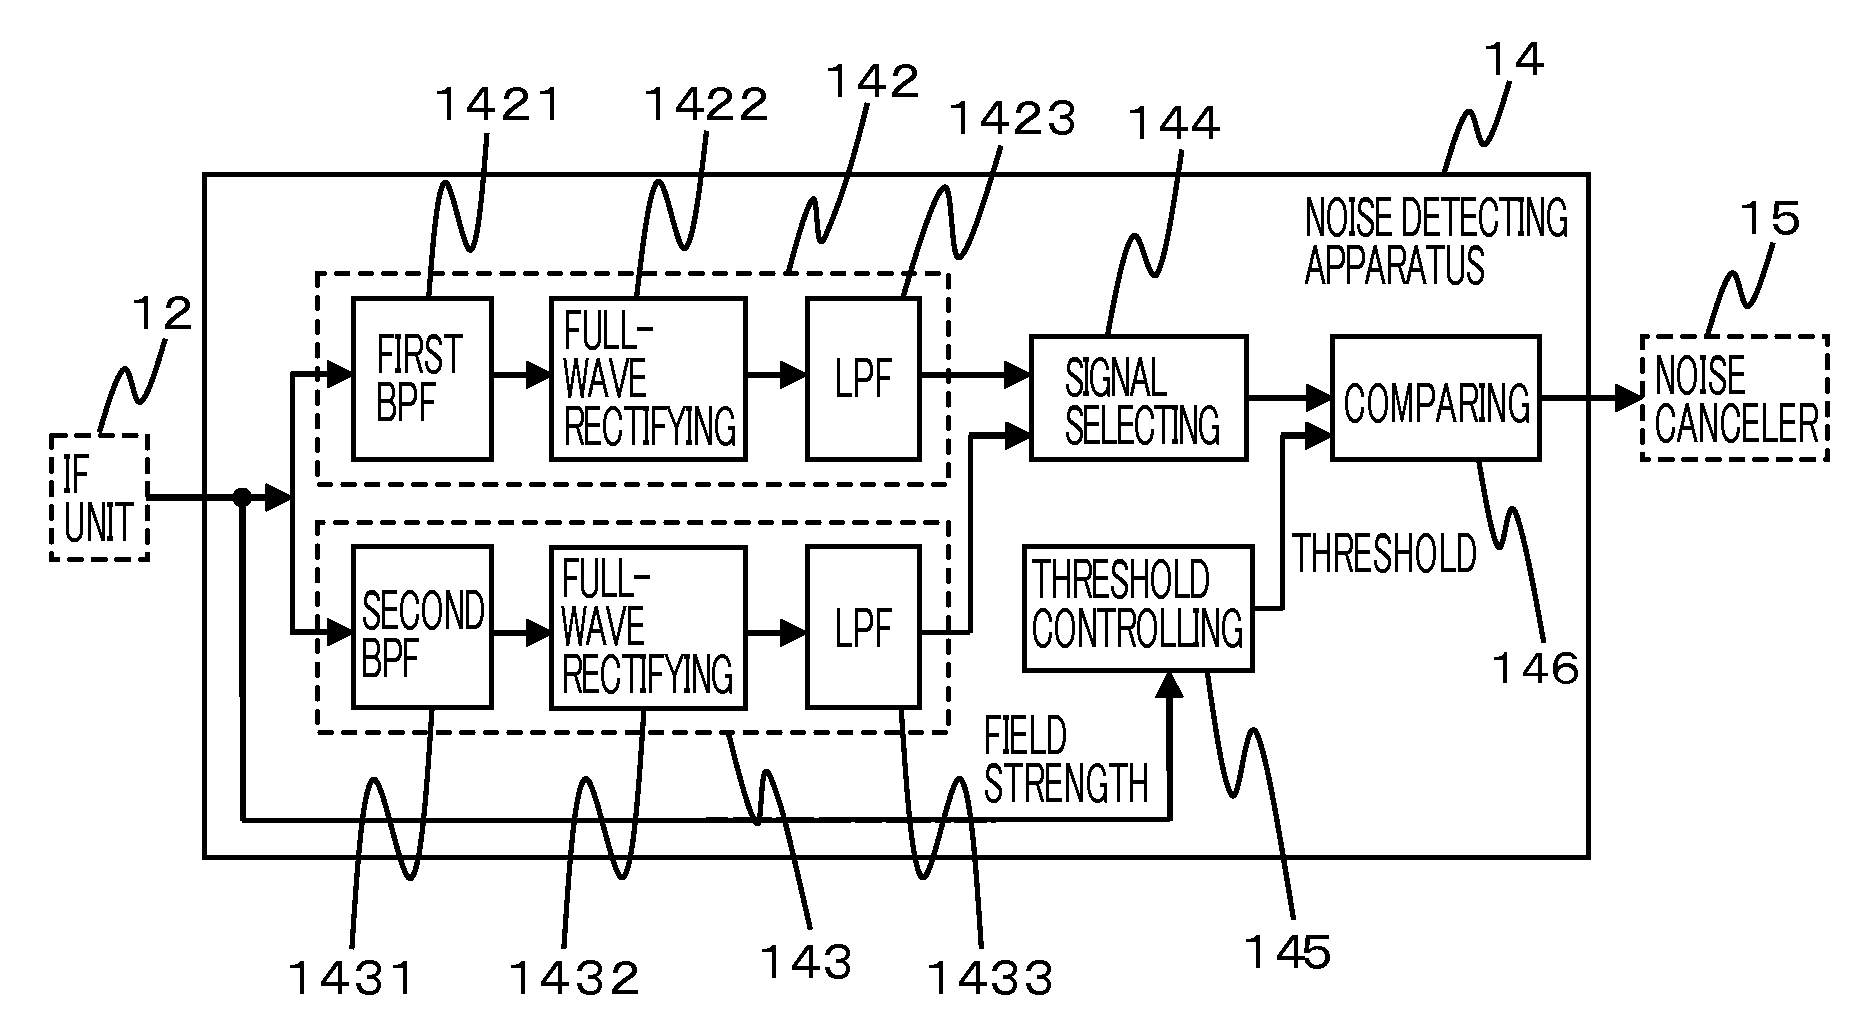 Noise Detecting Apparatus and AM Broadcast Receiving Apparatus